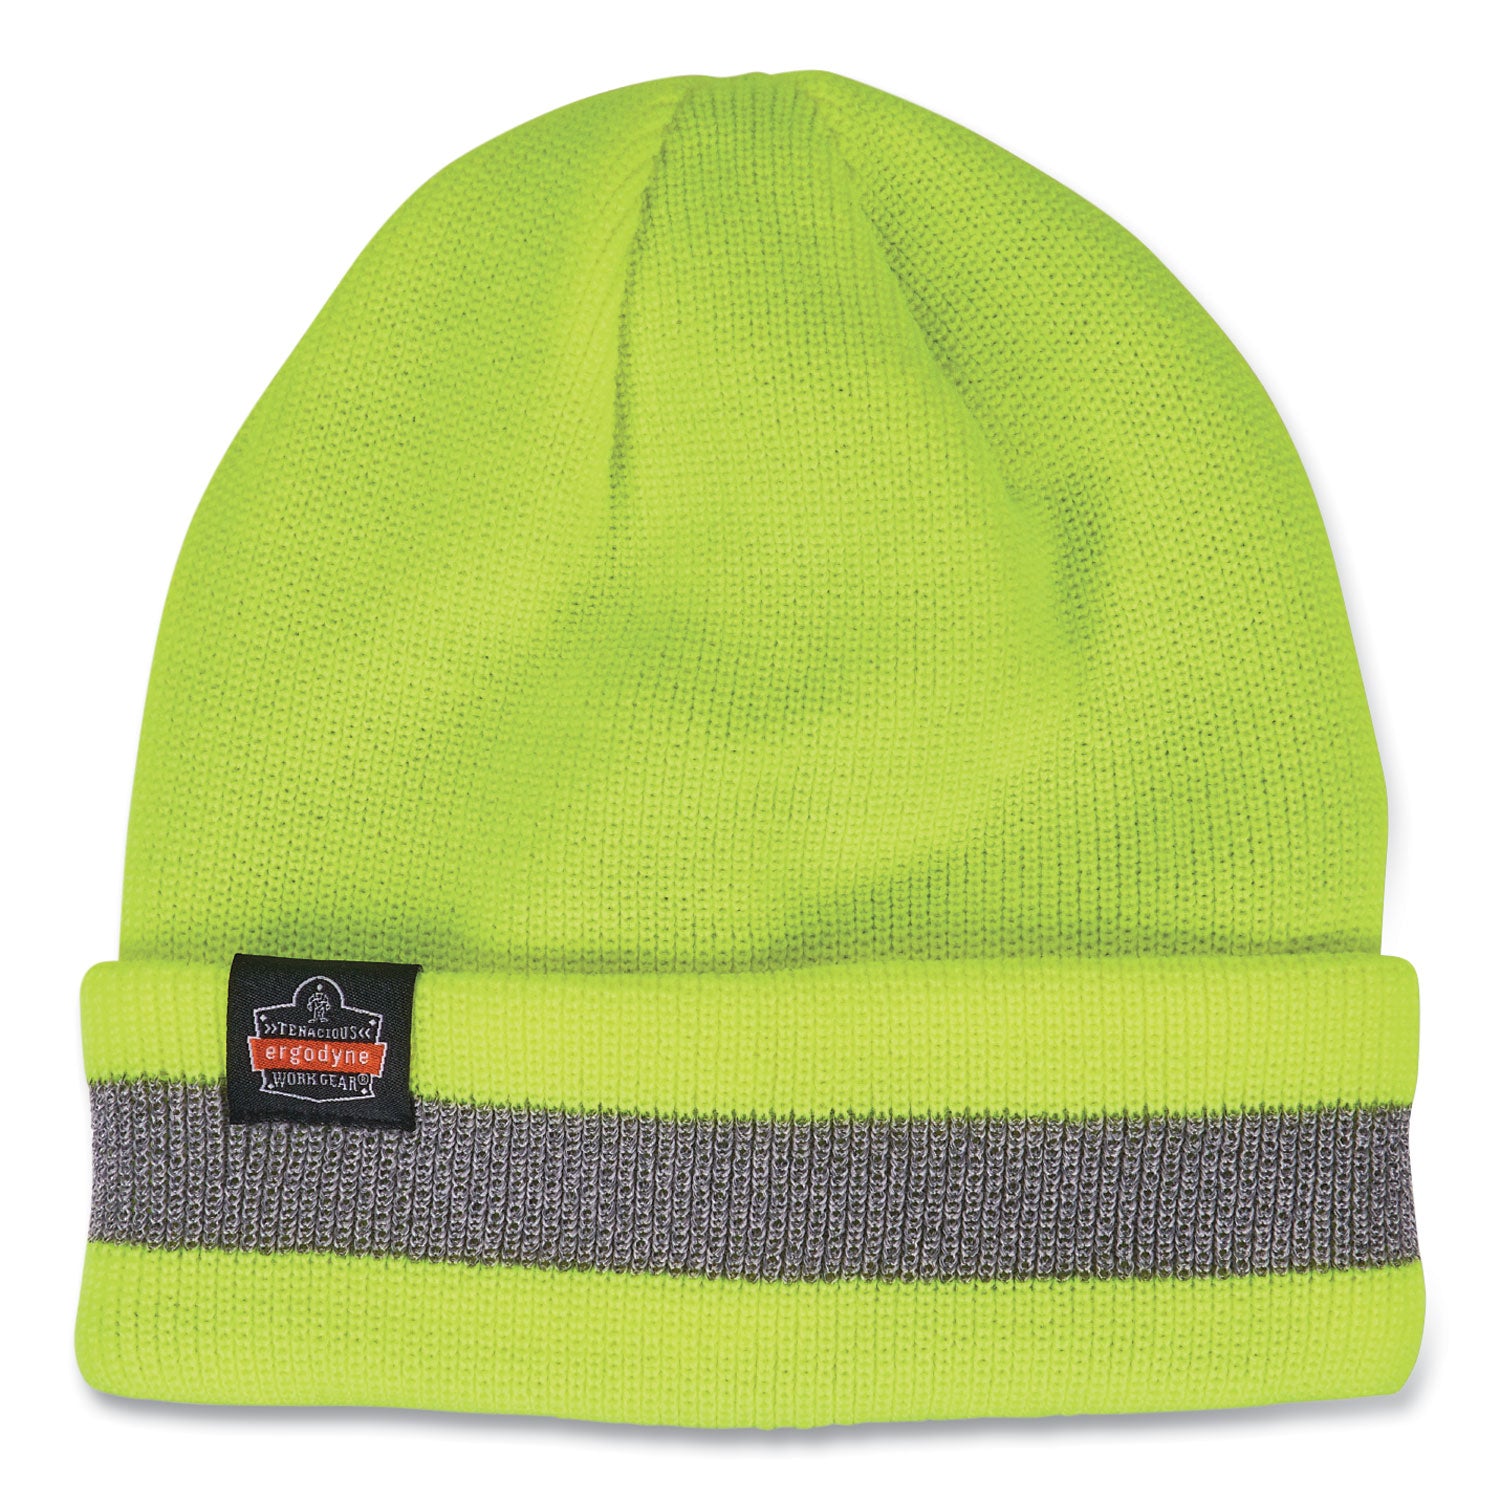 n-ferno-6803-reflective-rib-knit-winter-hat-one-size-fits-most-lime-ships-in-1-3-business-days_ego16864 - 1